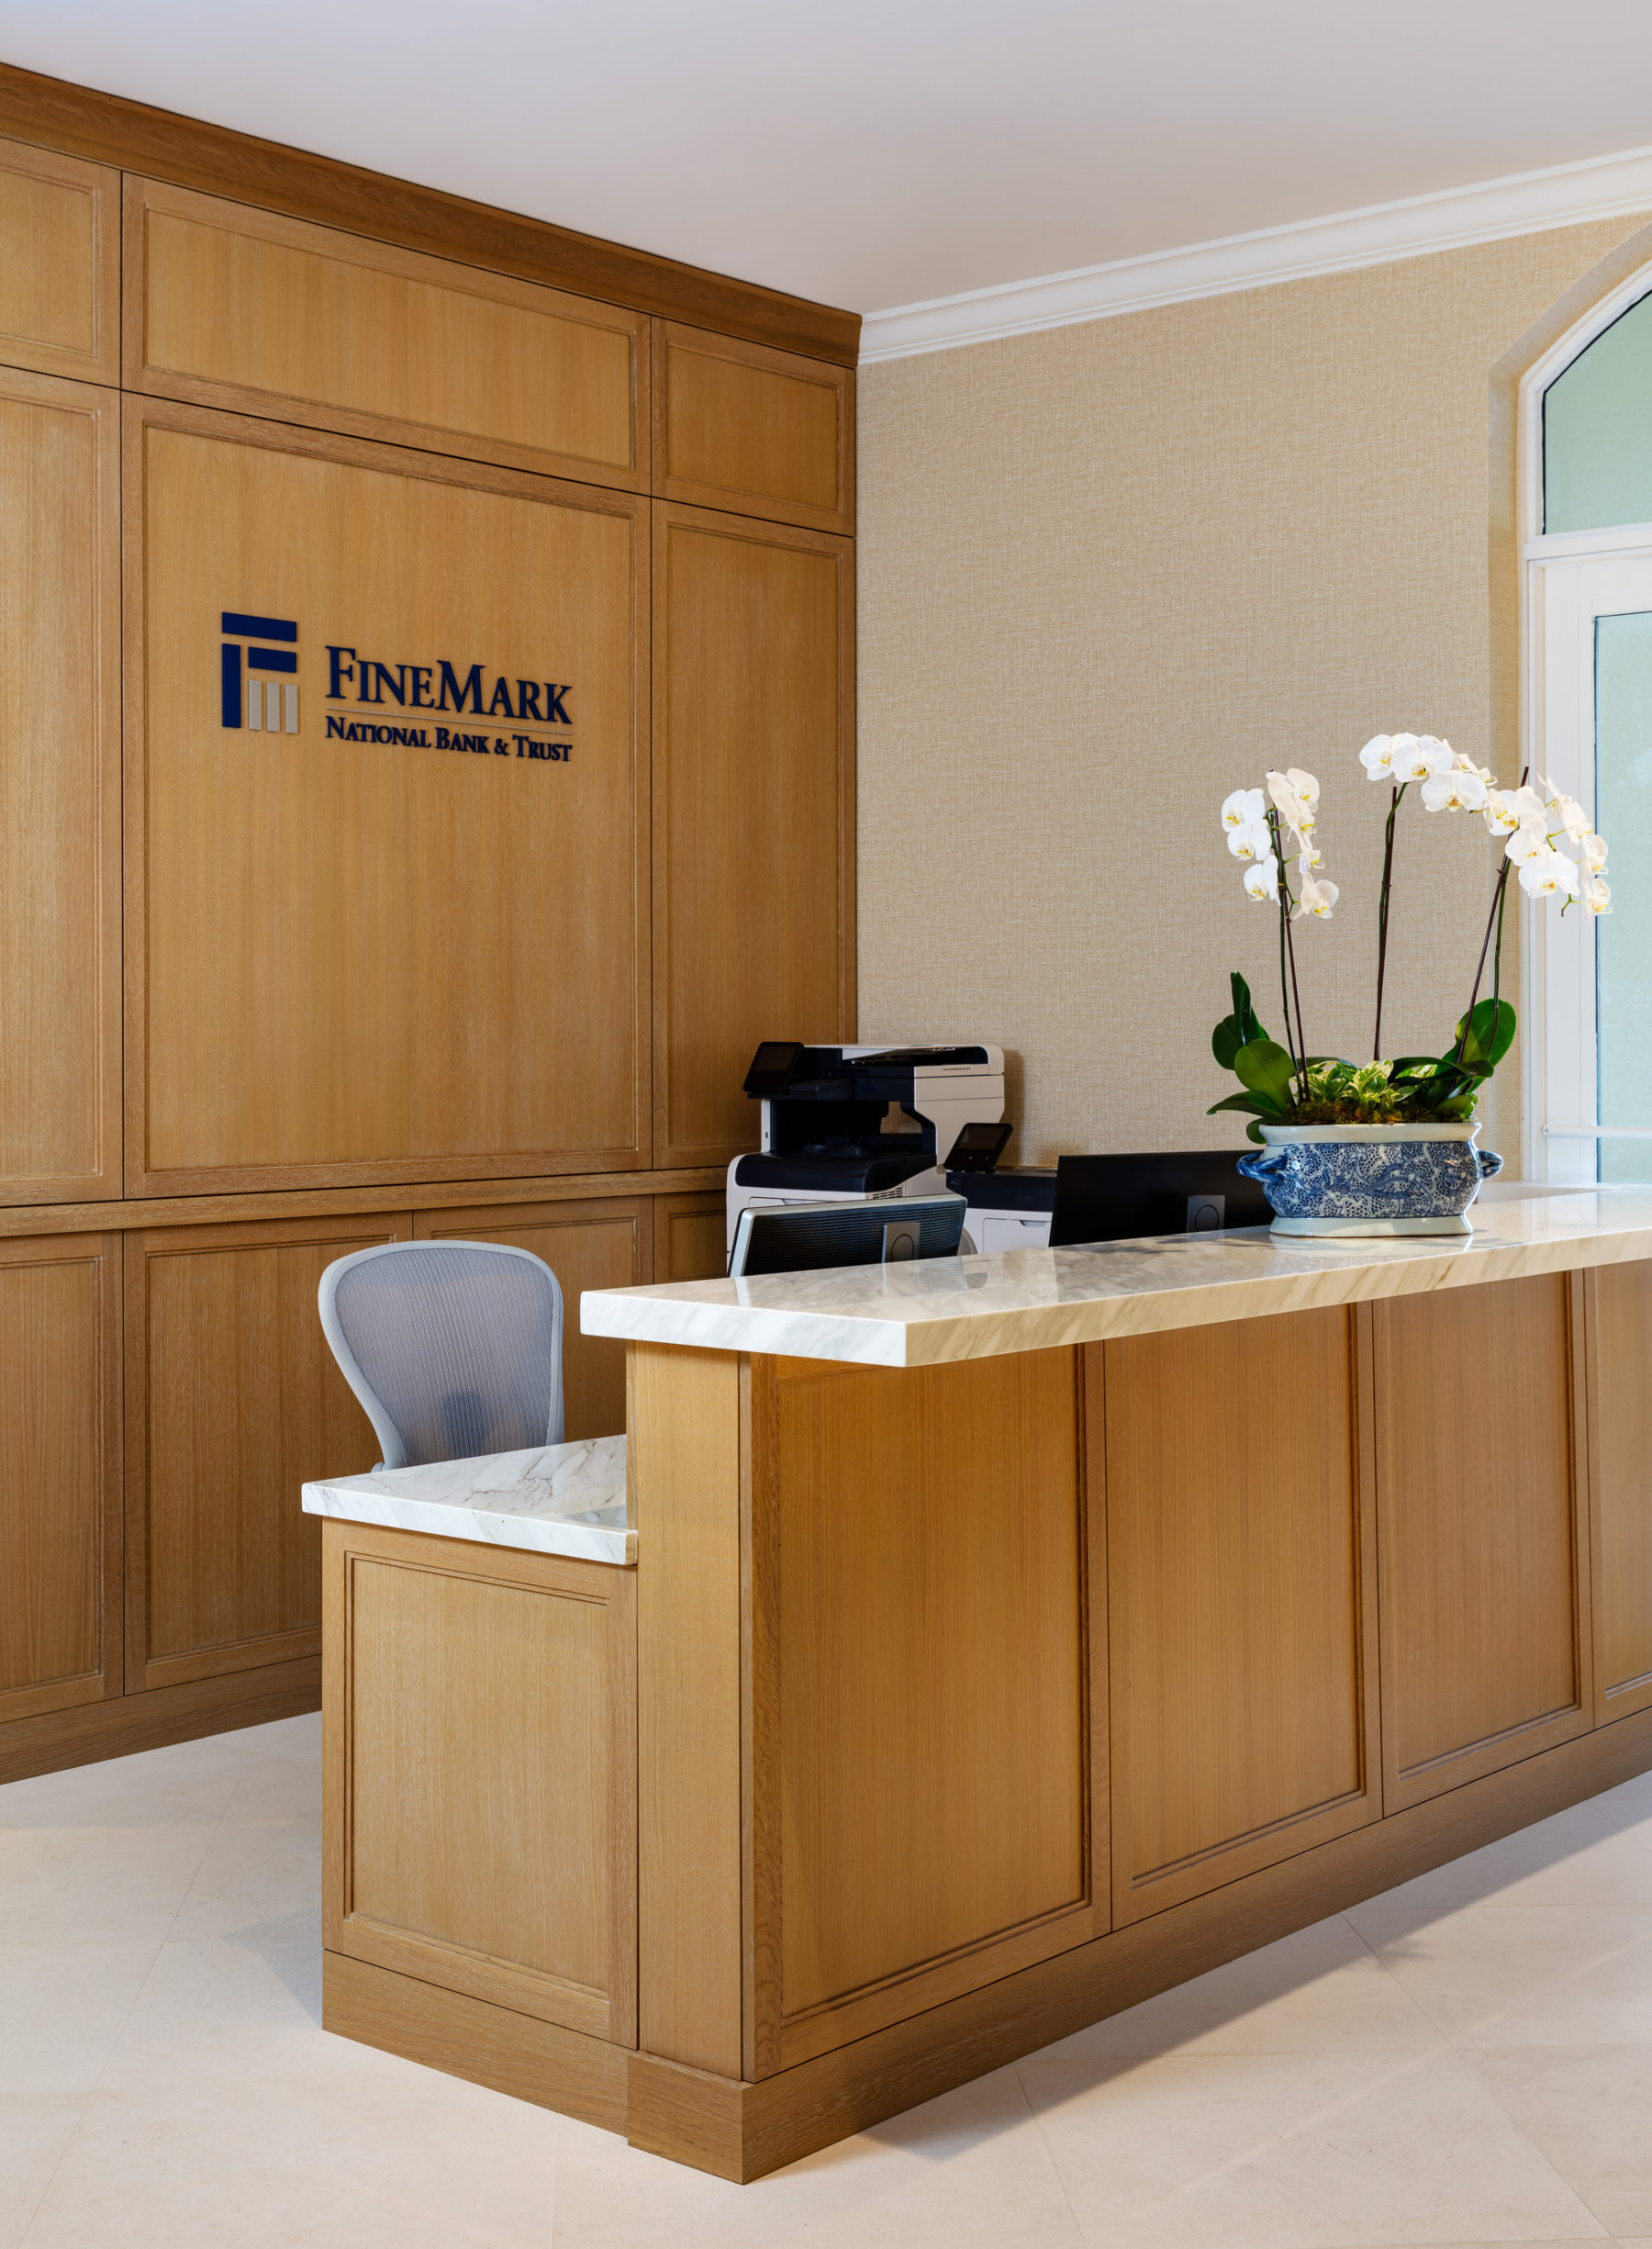 Reception desk with wooden cabinetry and blue and white planter with orchids